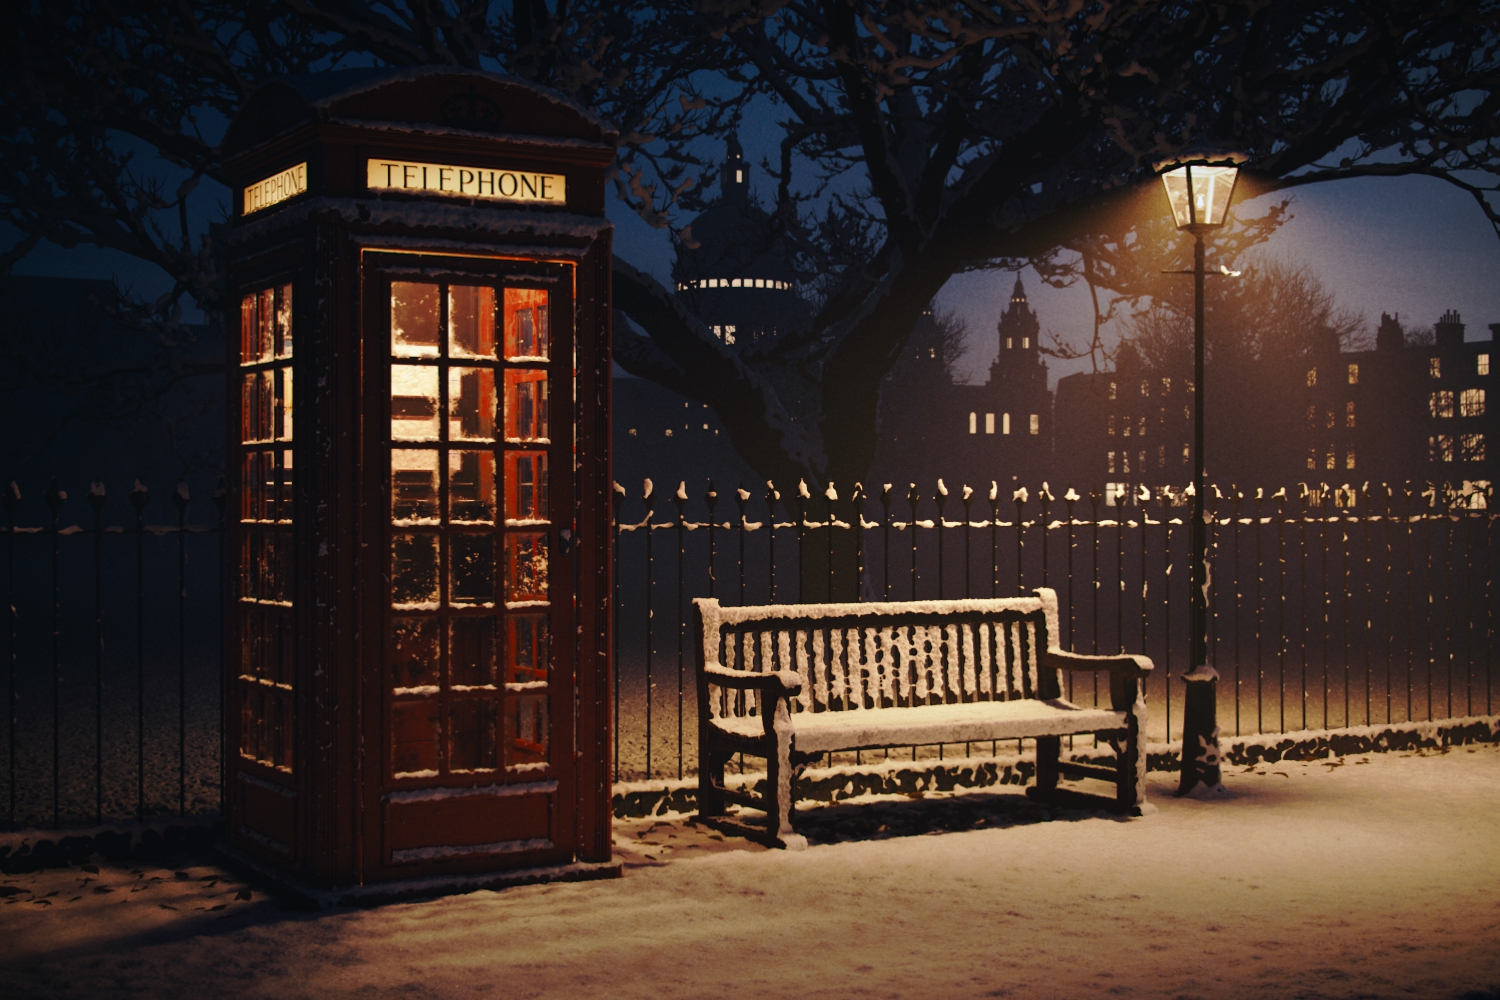 London scene with snow at night